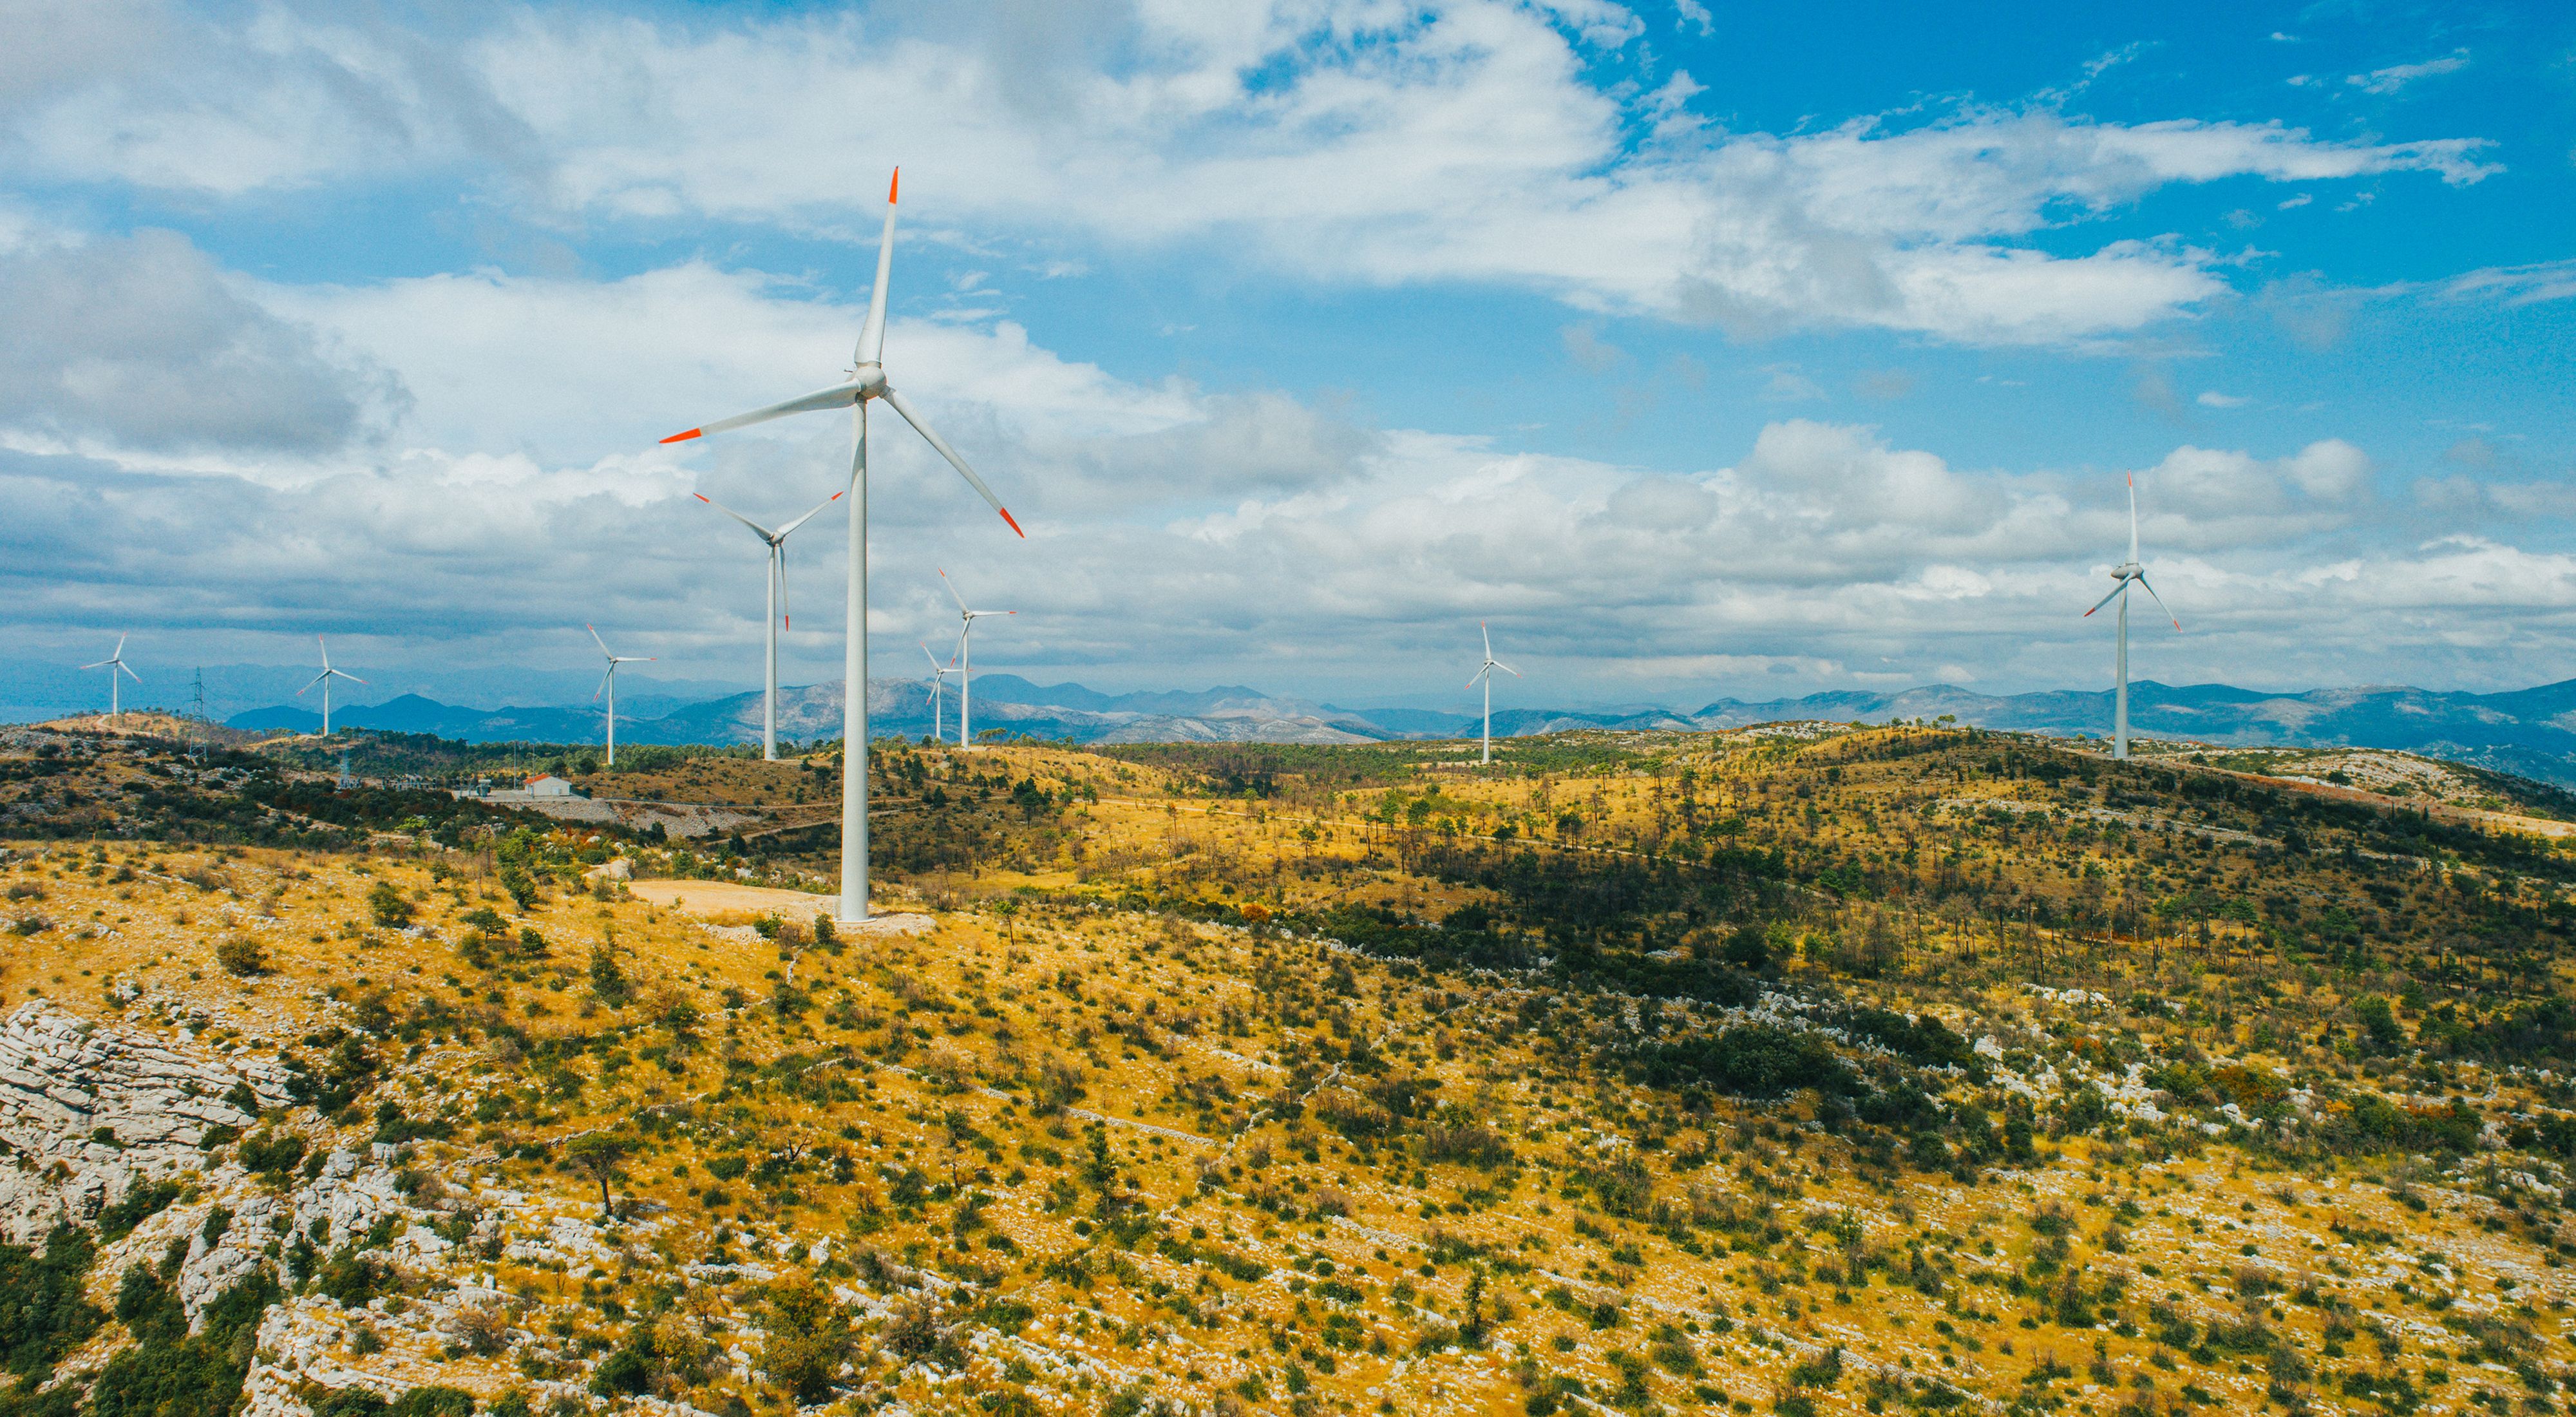 Scenic mountainous landscape with wind turbines against cloudy sky.